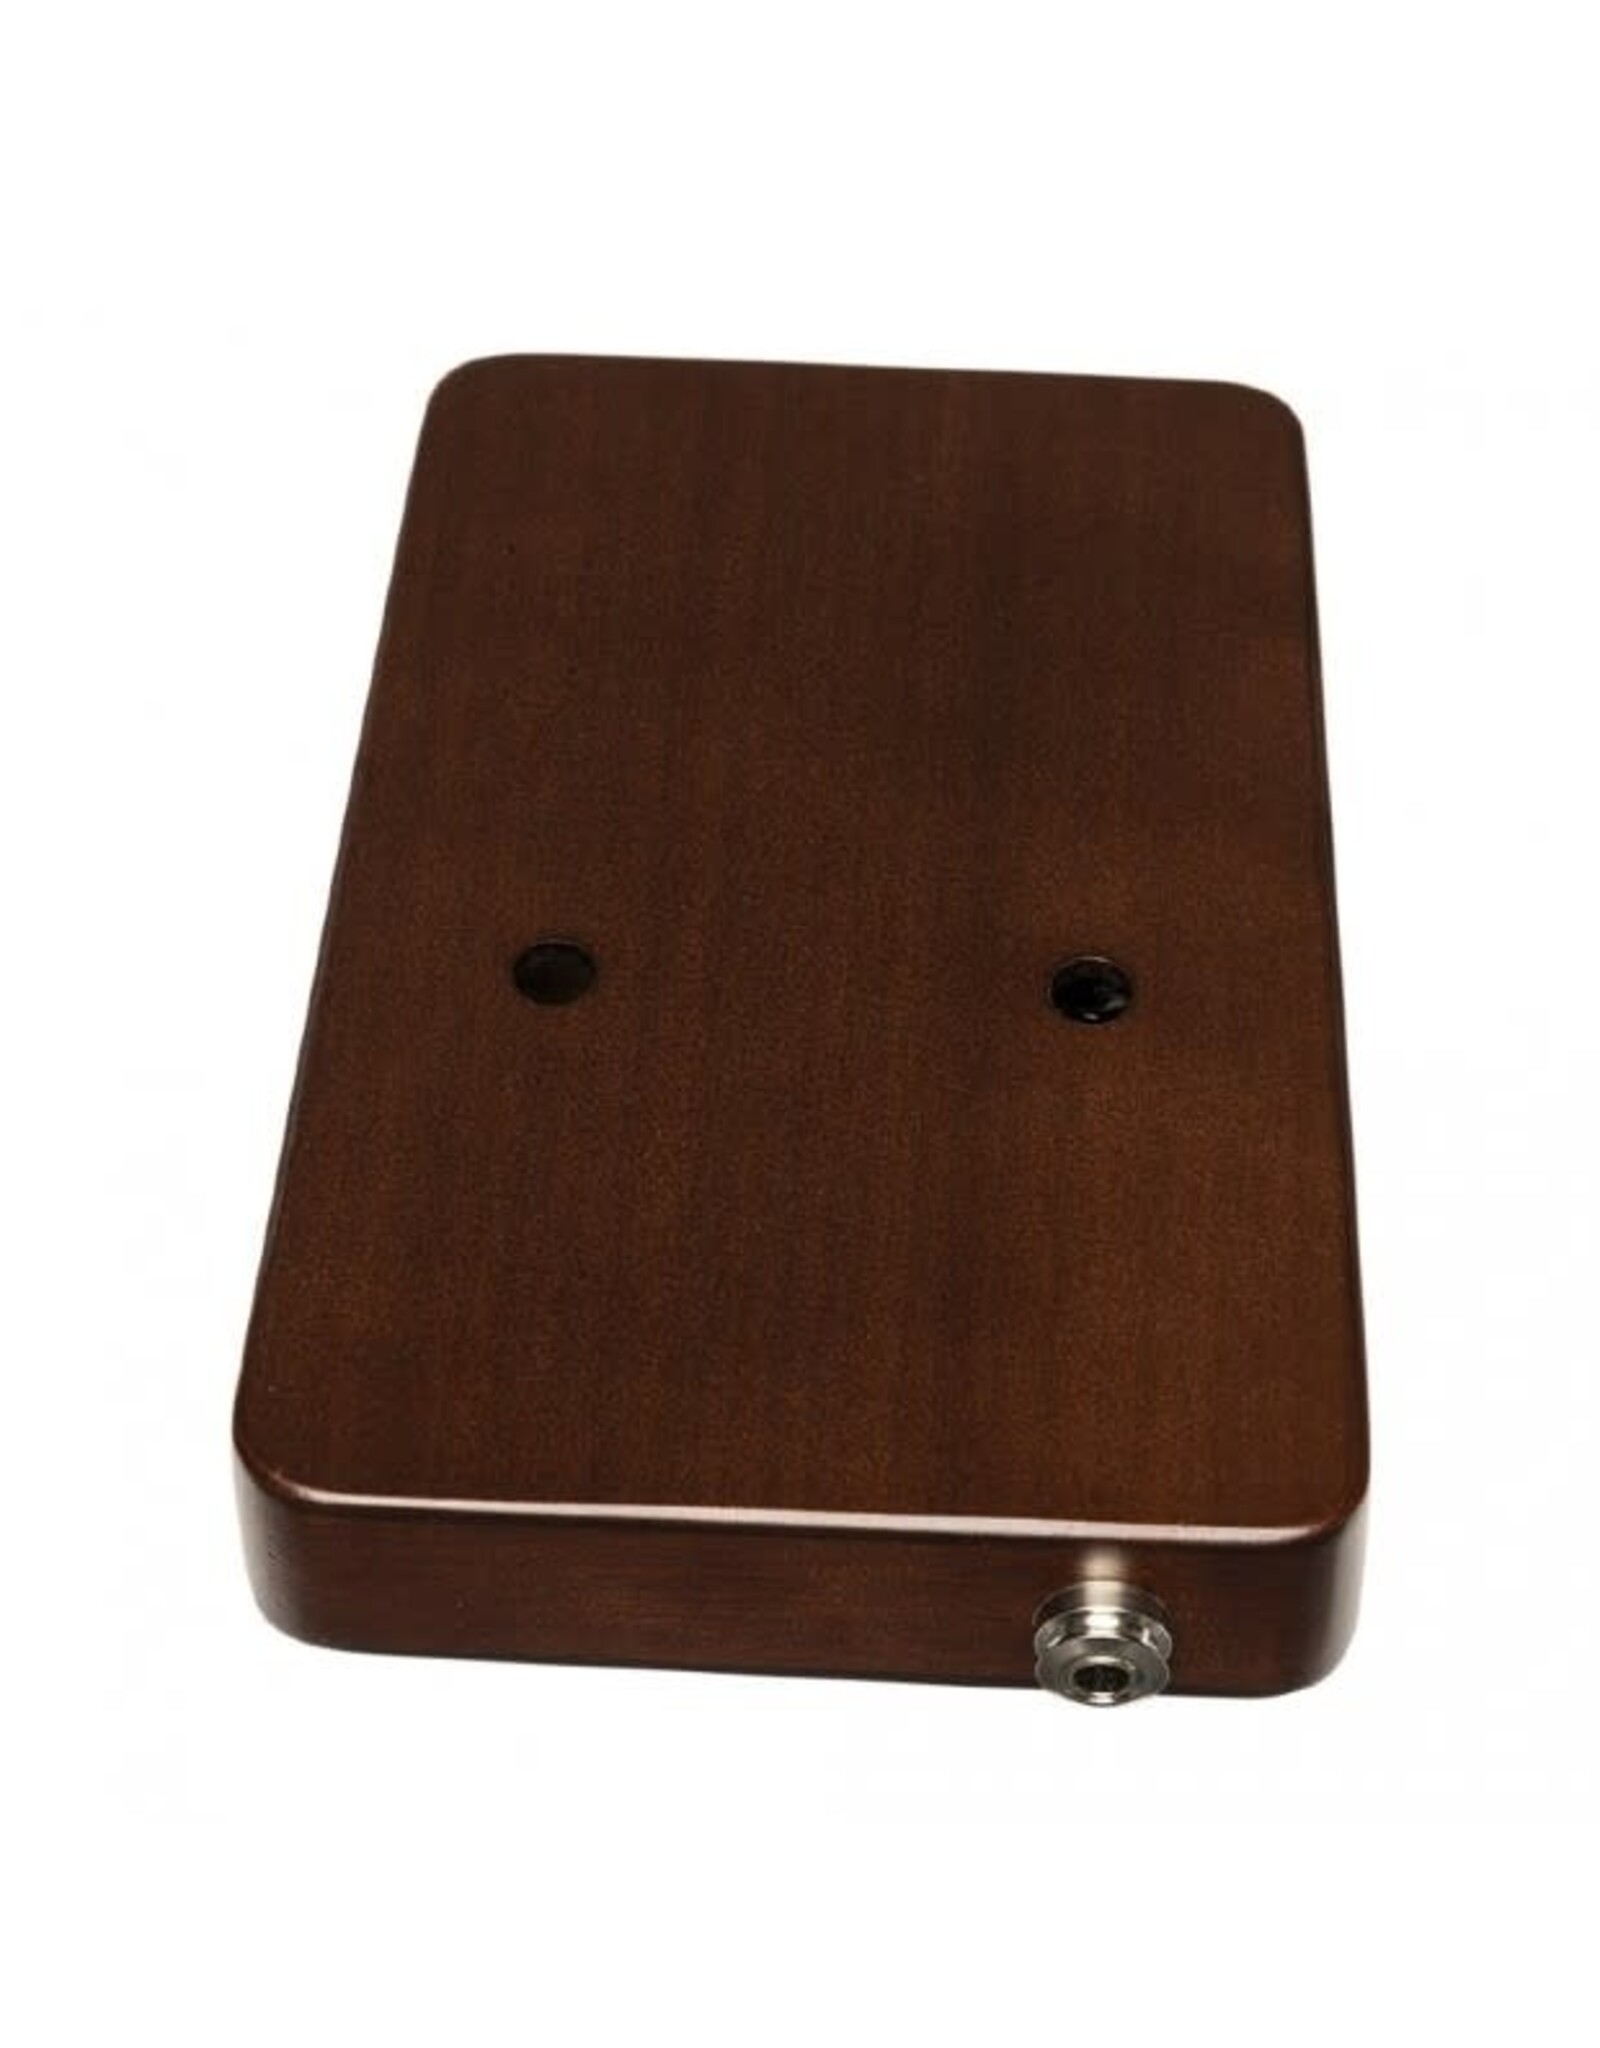 Stagg Stagg Pro 17 Key Acoustic Electric Kalimba Mahogany